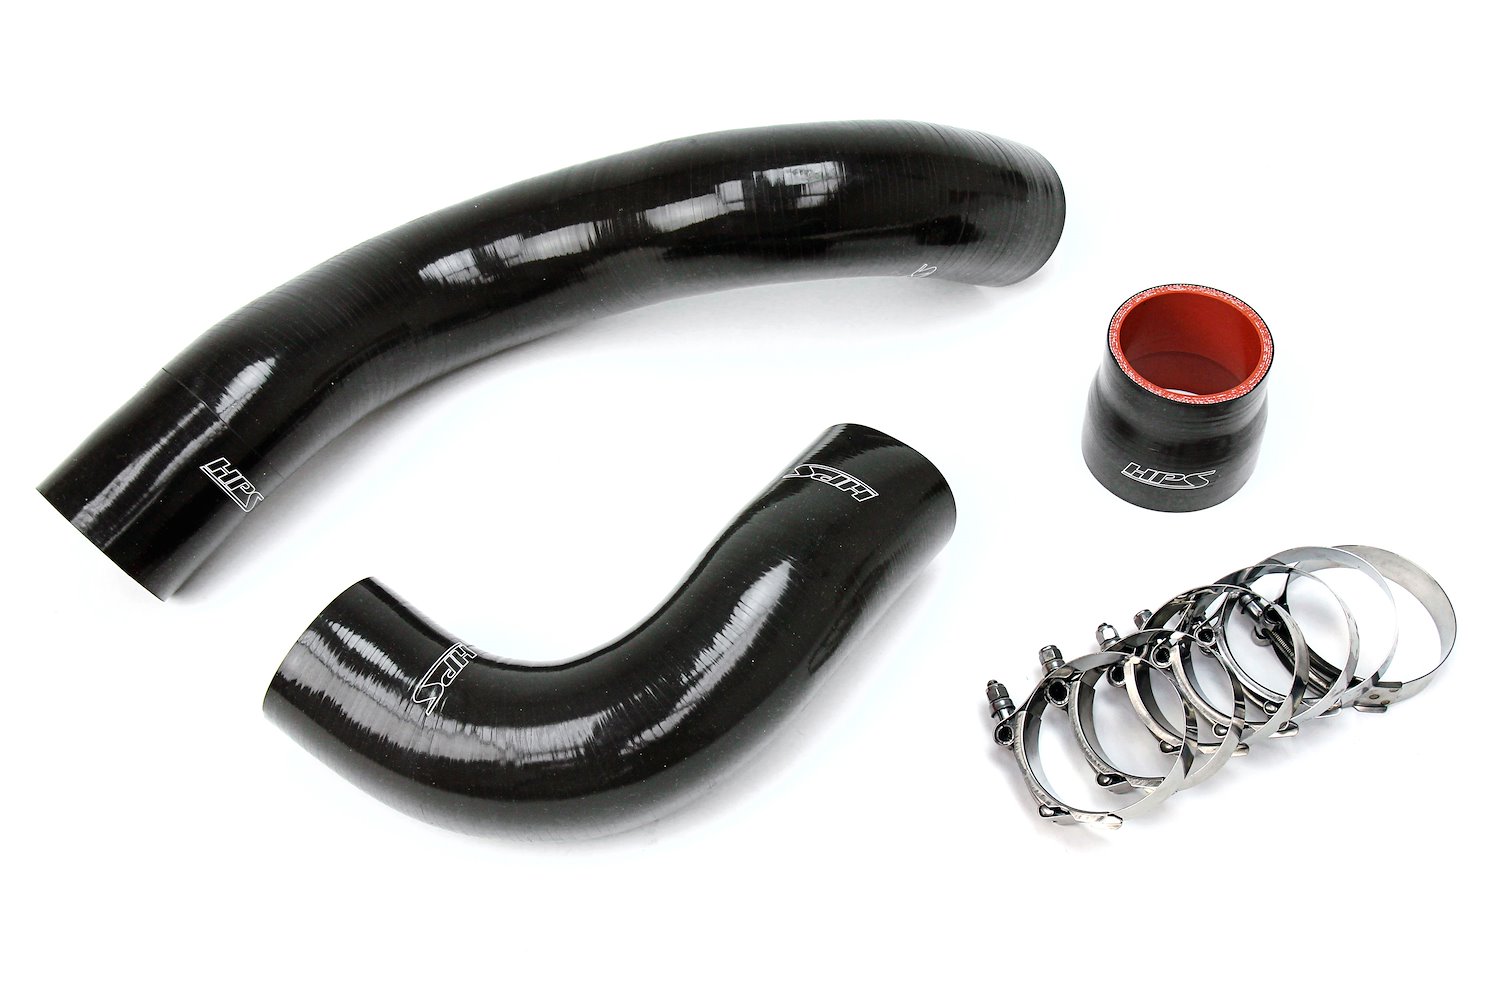 57-1697-BLK Silicone Intercooler Hose Kit, High-Temp Resistant 4-Ply Reinforced Silicone, Replaces Rubber Intercooler Hoses